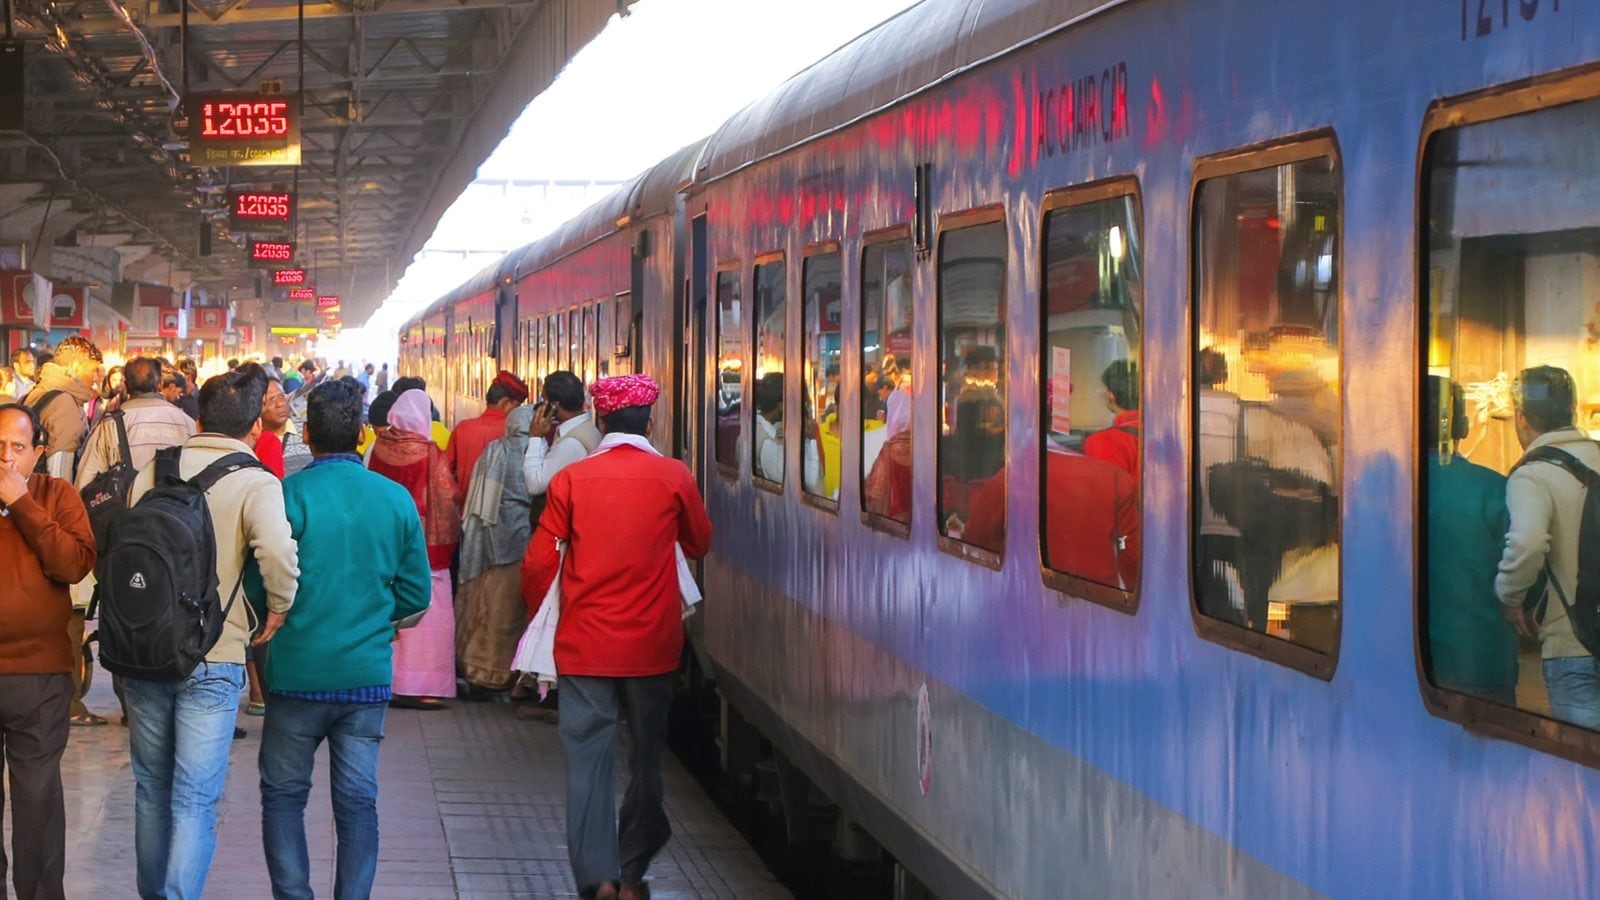 Indian Railways Allows You to Transfer Your Train Ticket to Family Members; Here's How to do it